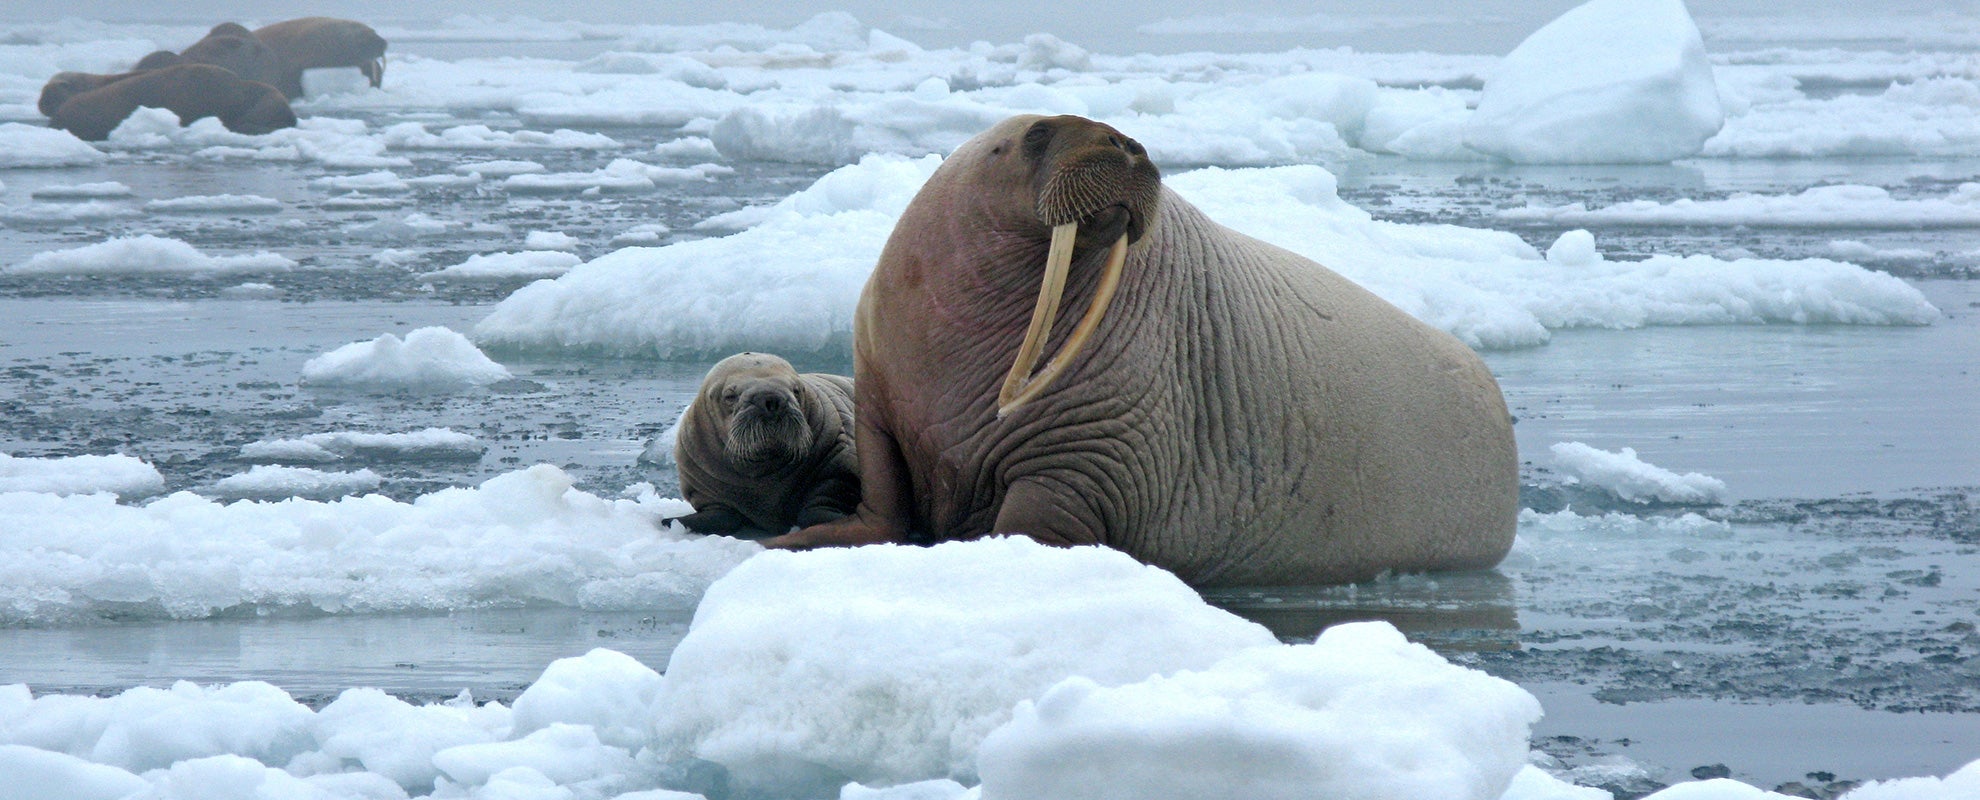 Walruses in the Chukchi Sea. The Chukchi is home to a rich variety of marine life.